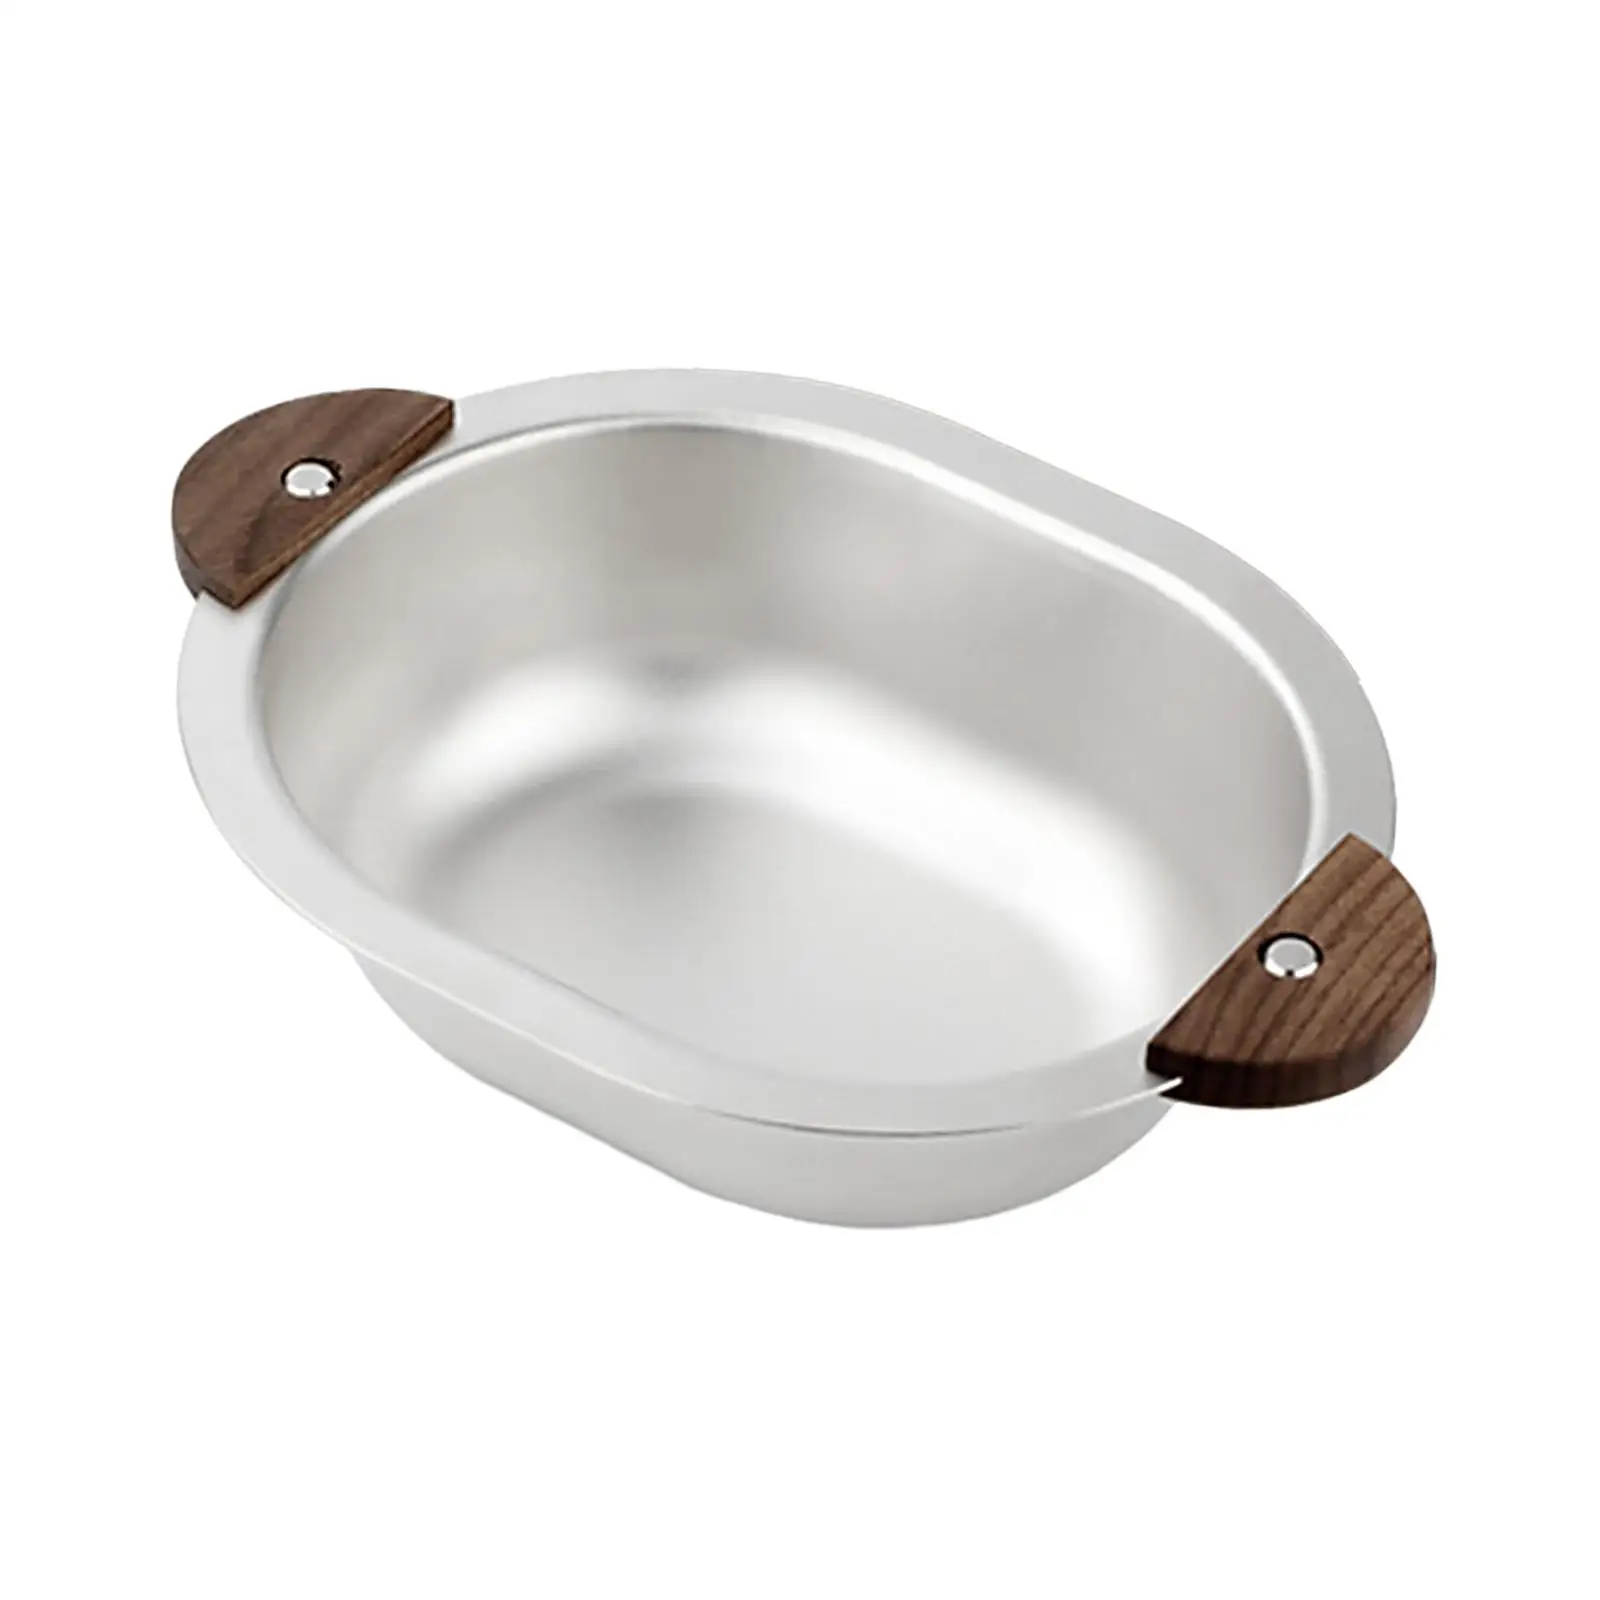 Stainless Steel Bowl and Handle Double Ears Unbreakable Insulated Bowl Mixing Bowl for Rice Fruit Salad Cereal Soup Noodles